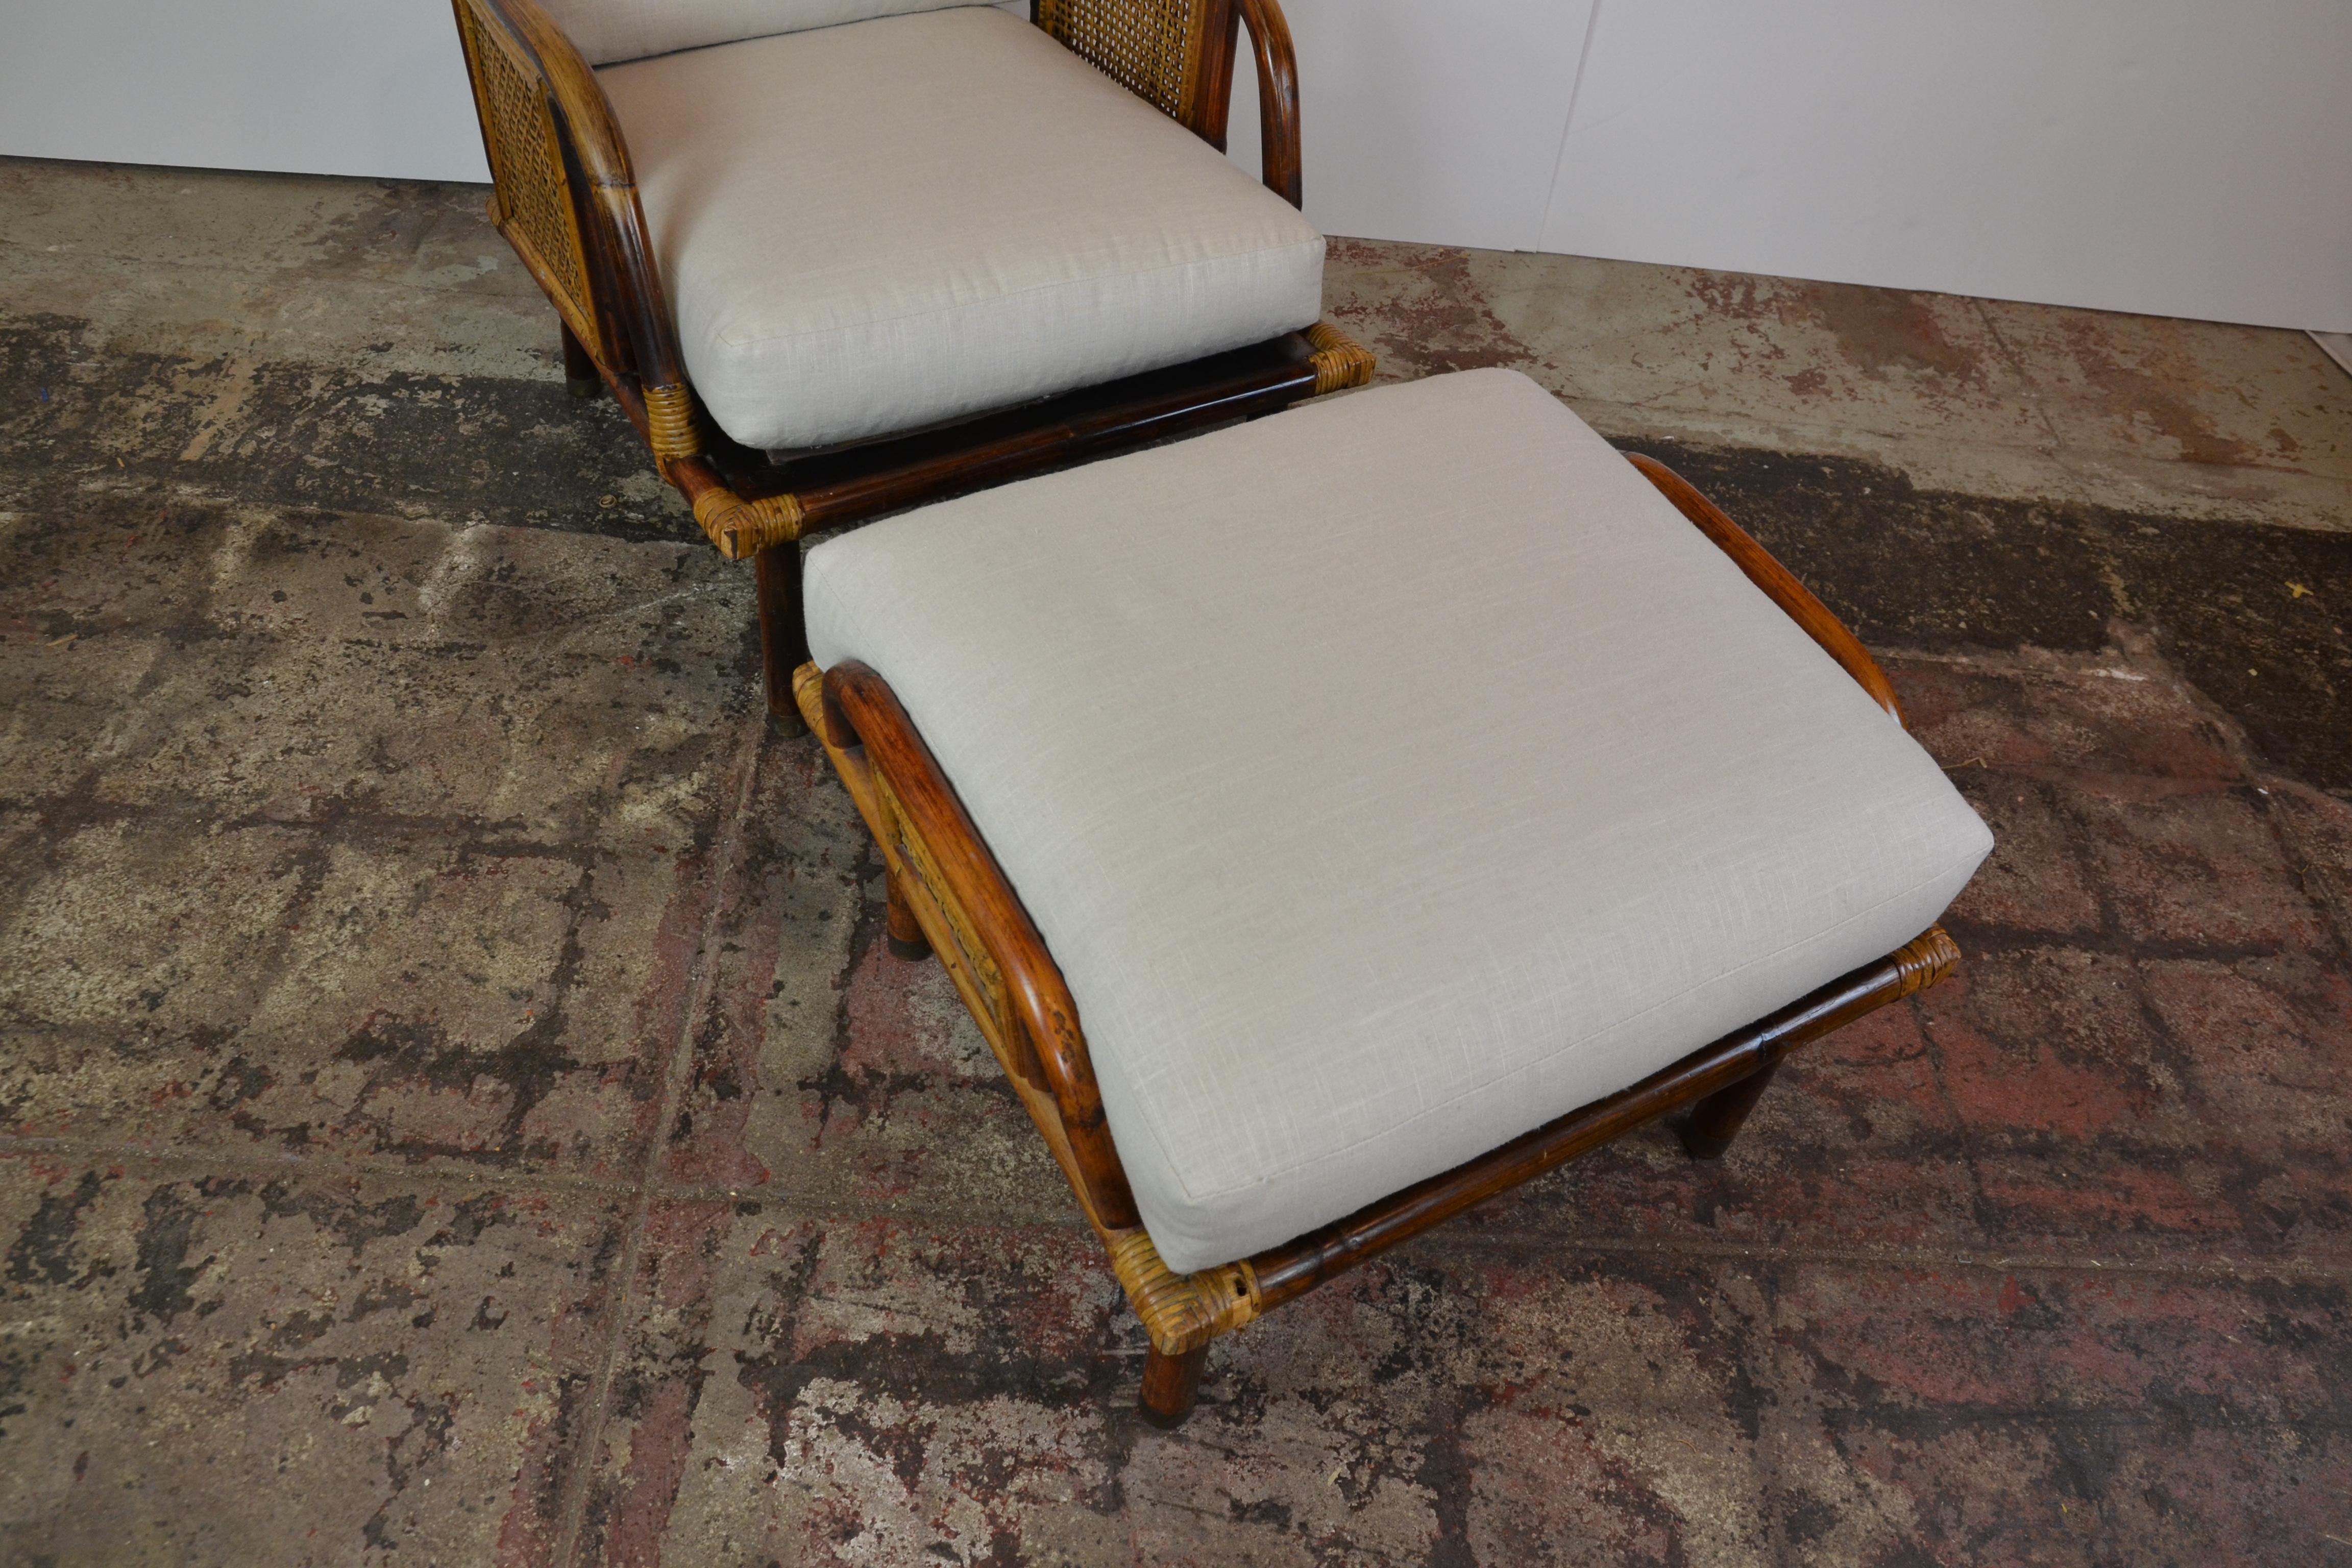 A beautiful modern rattan and cane lounge chair and ottoman from a limited series by Ficks Reed Company, circa 1950. Expertly crafted hardwood and rattan construction with cane panel detail. A fabulous design that is extremely comfortable. Newly